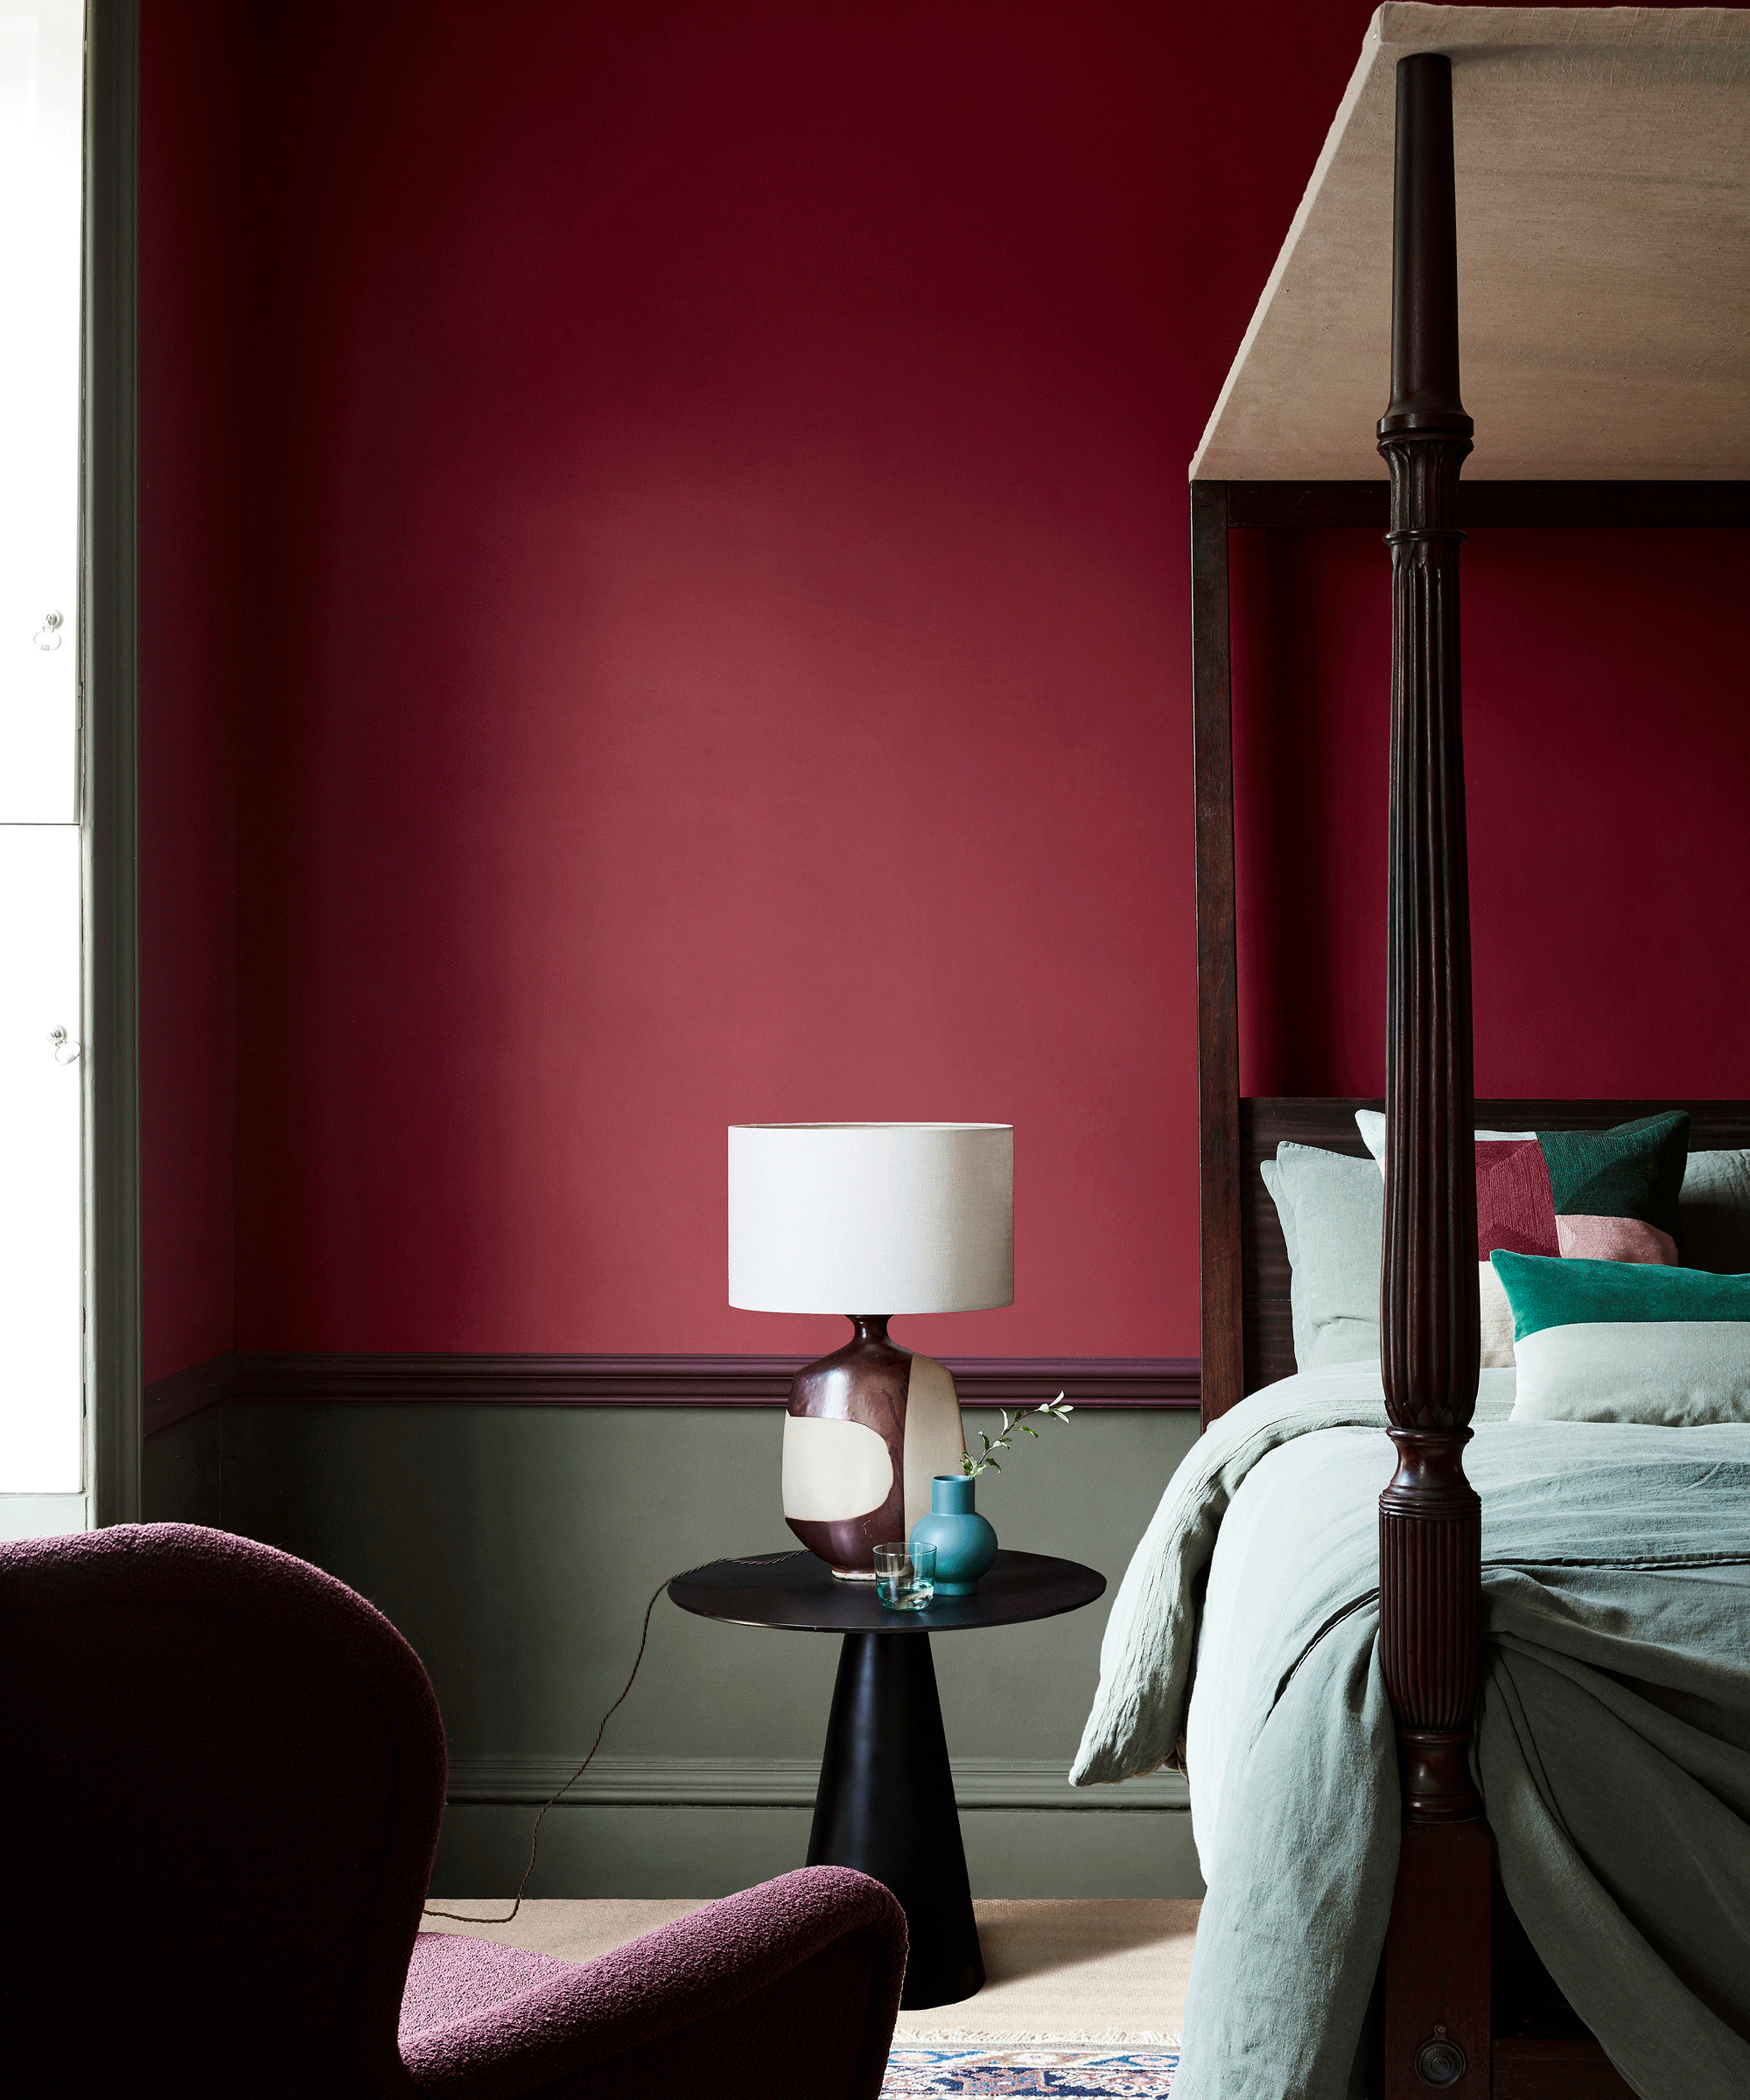 Bedroom with wall painted red at the top and green below the dado rail